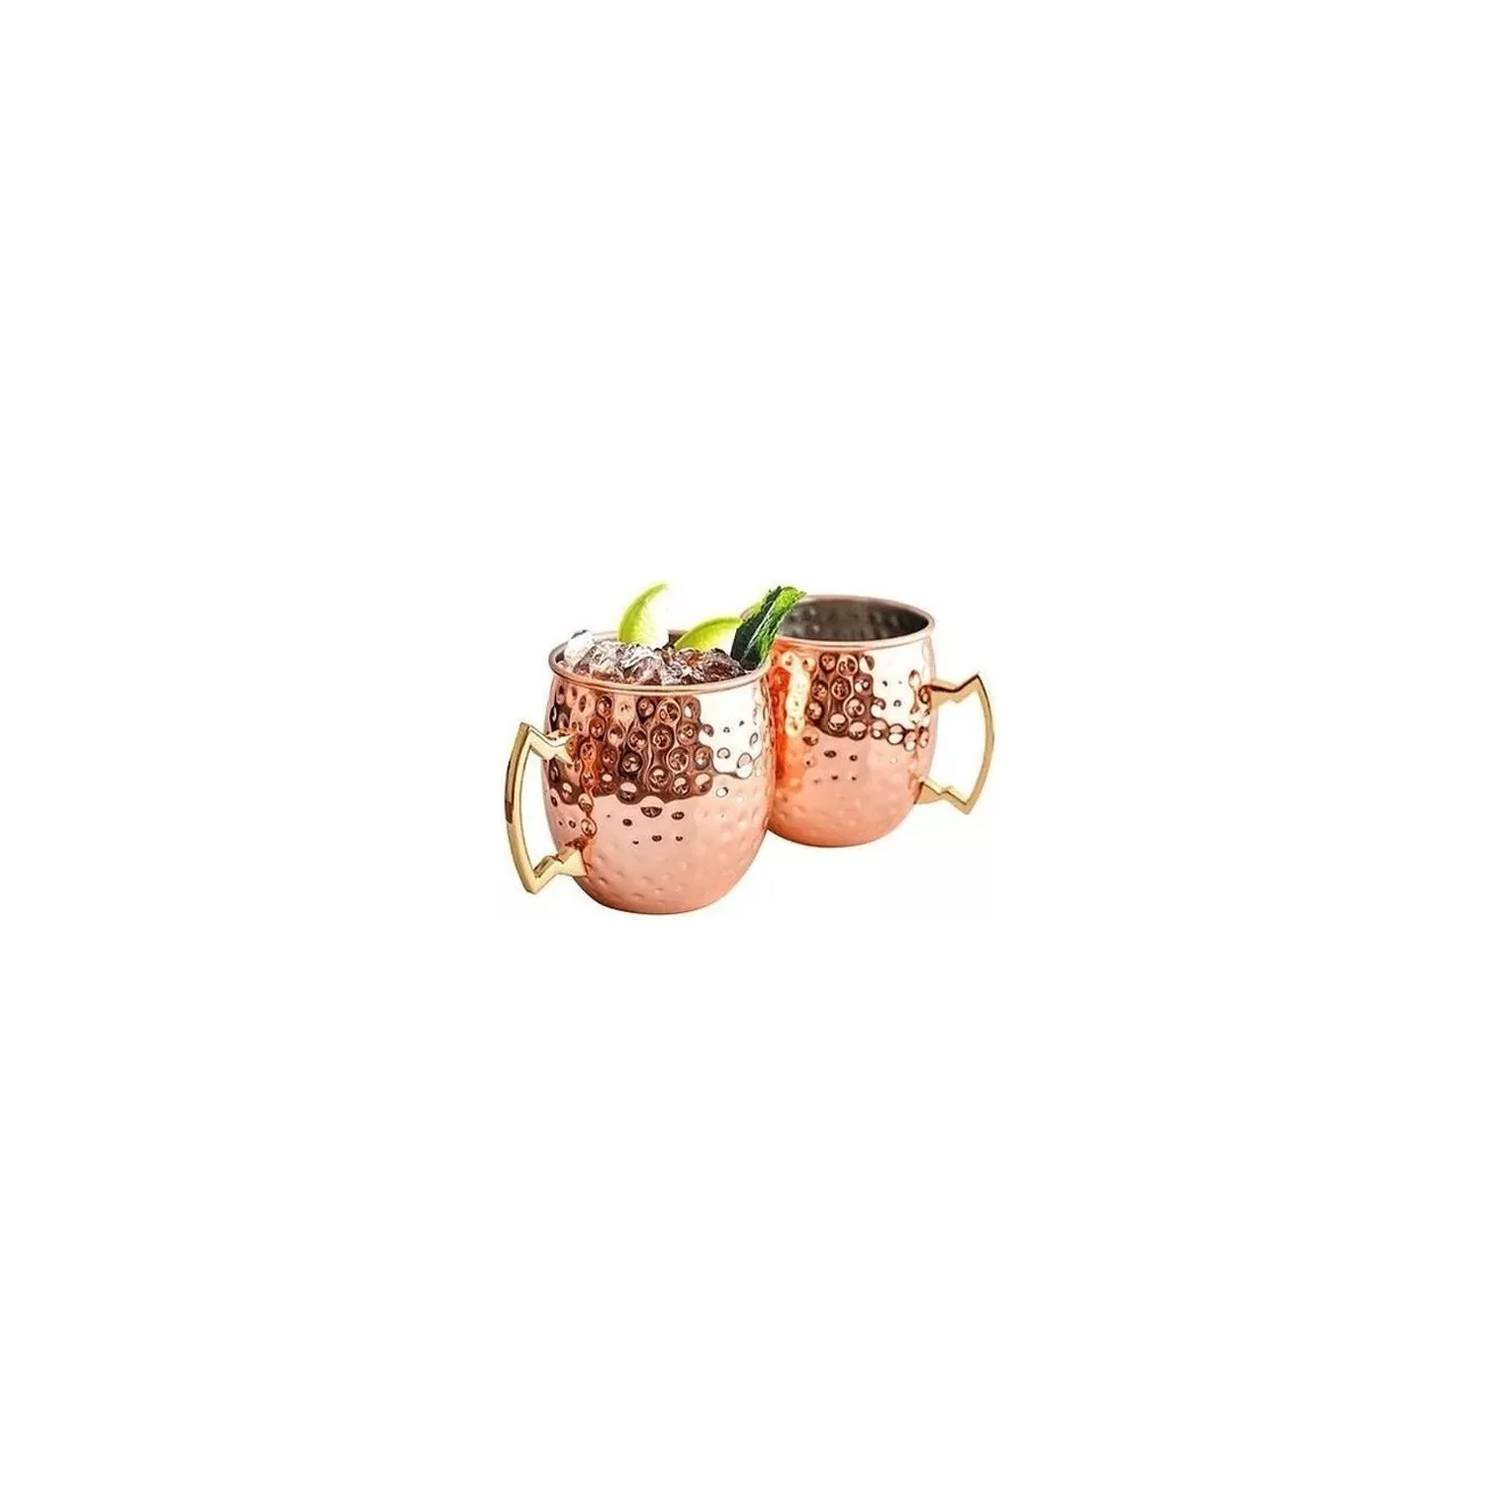 Taza Metálica Moscow Mule Cobre